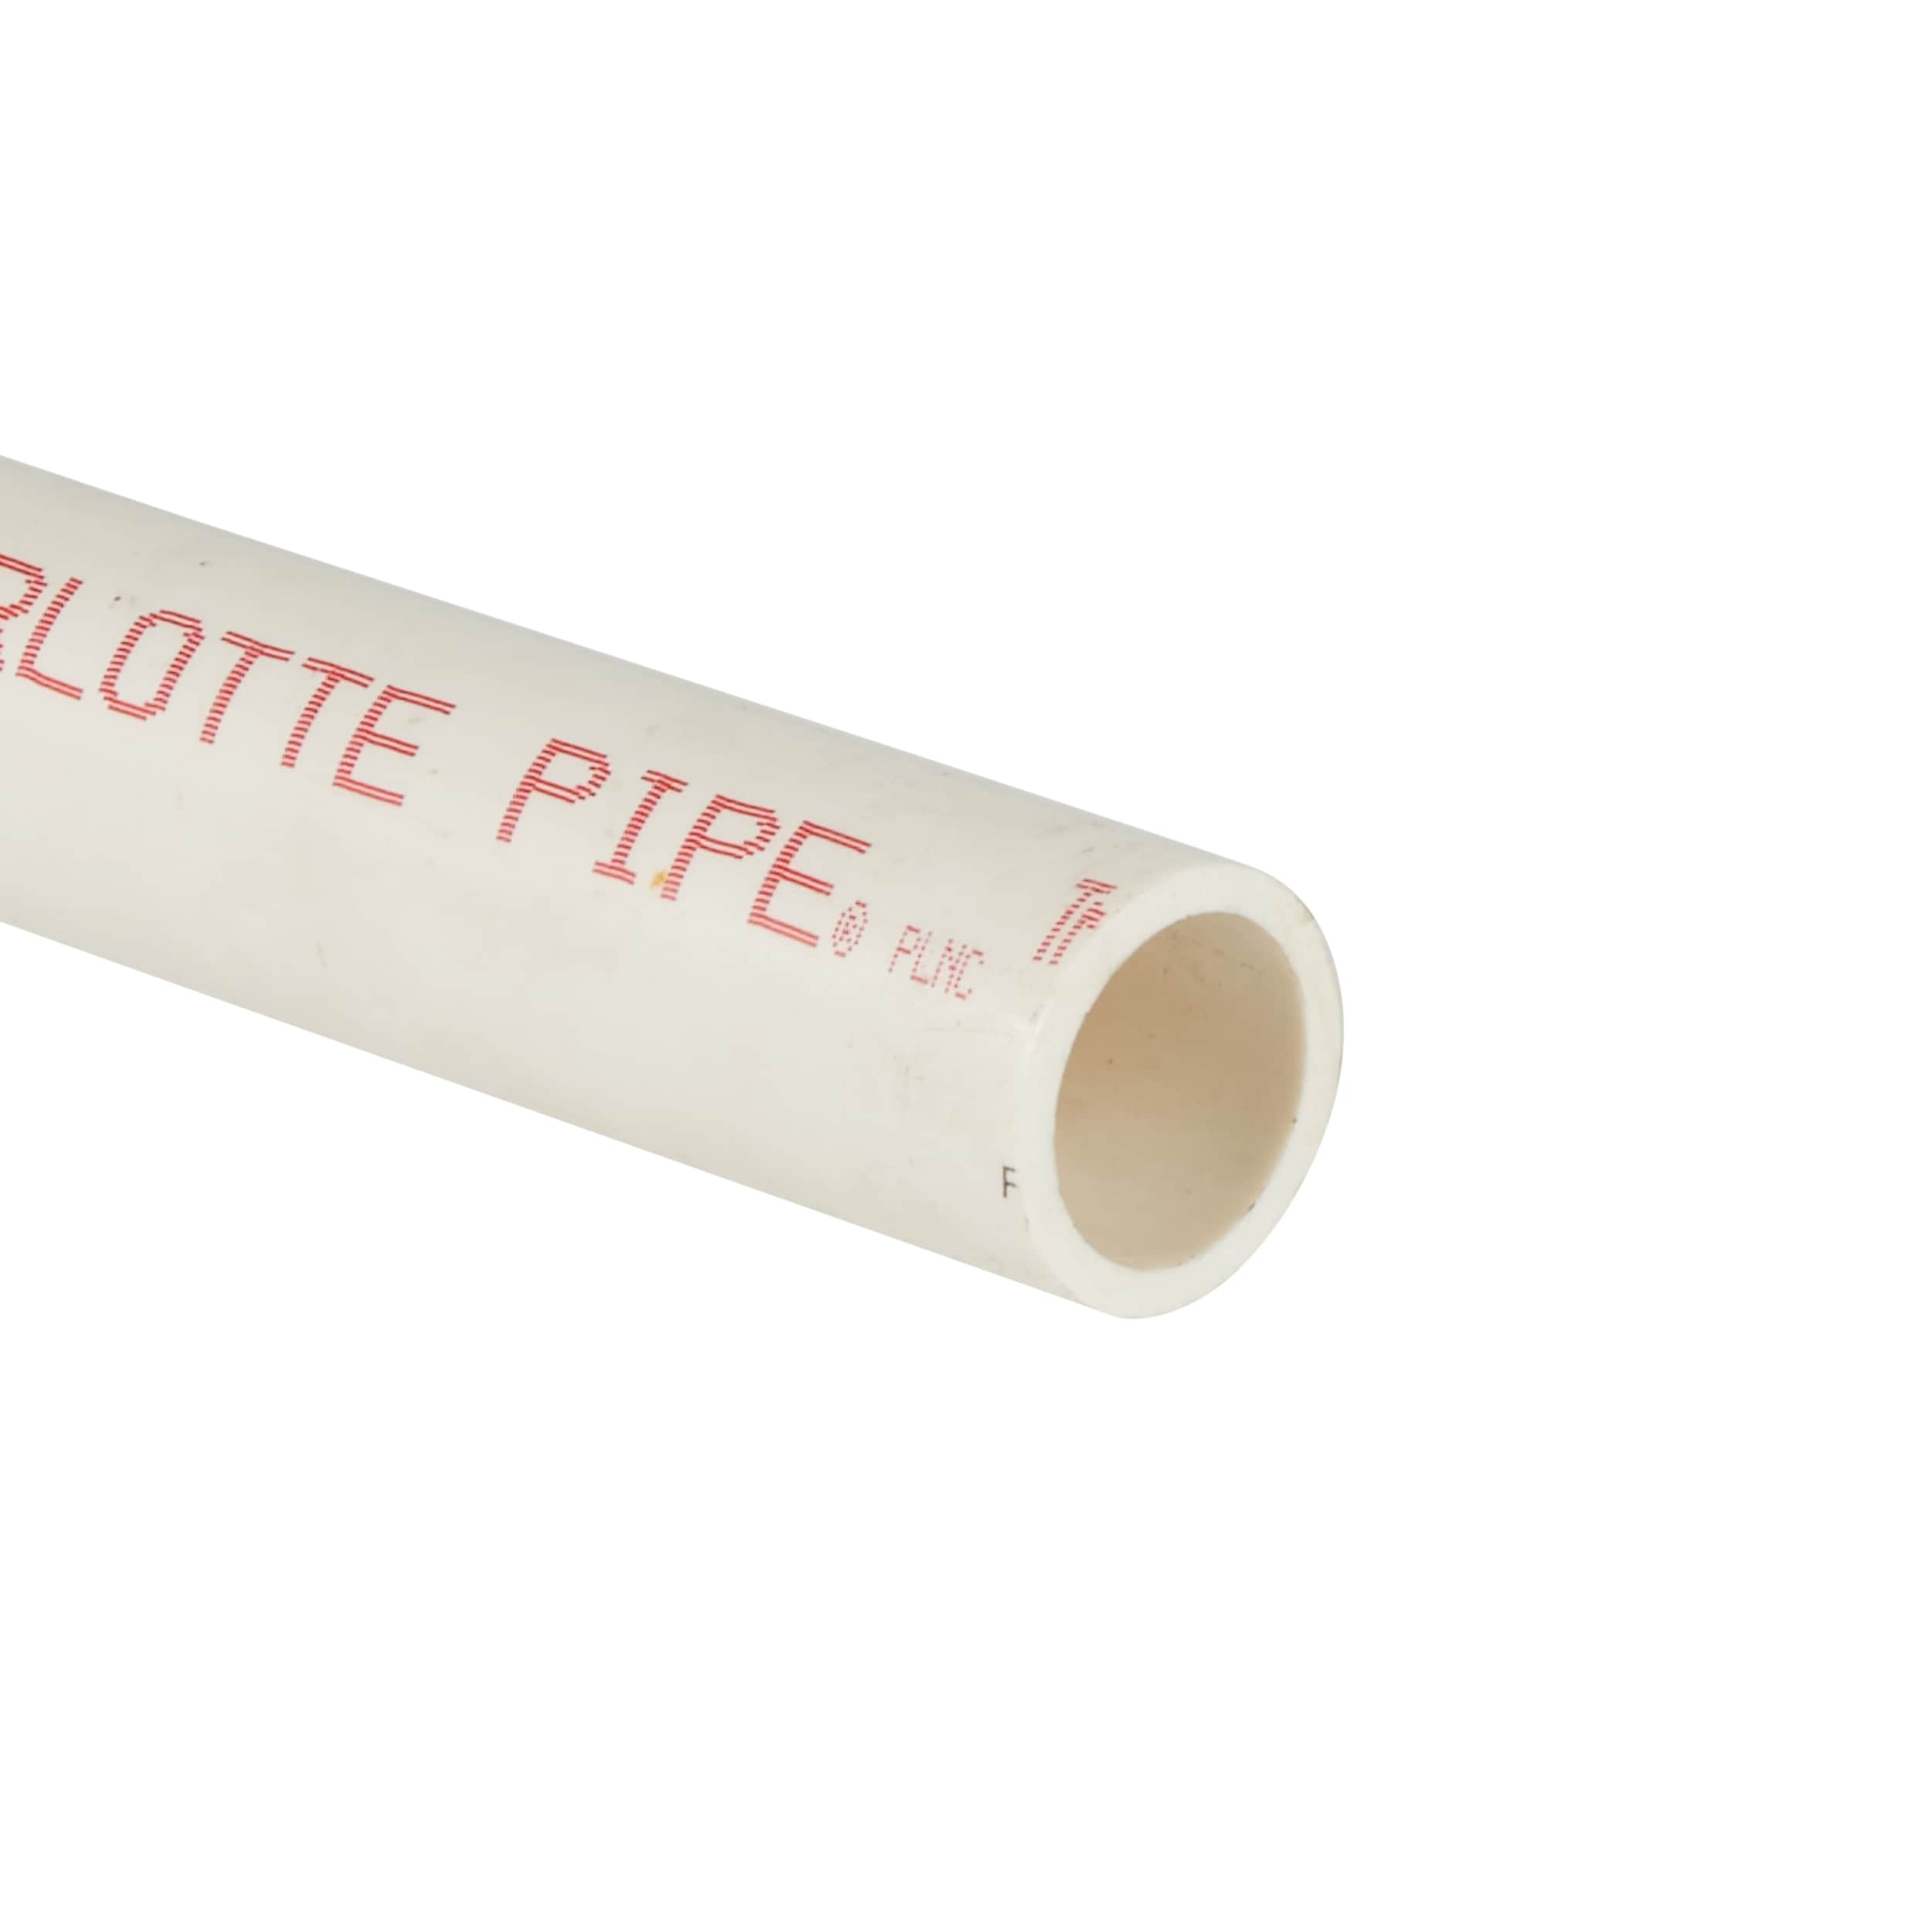 Charlotte Pipe 1 x 20 Sch 40 Belled End Pipe at